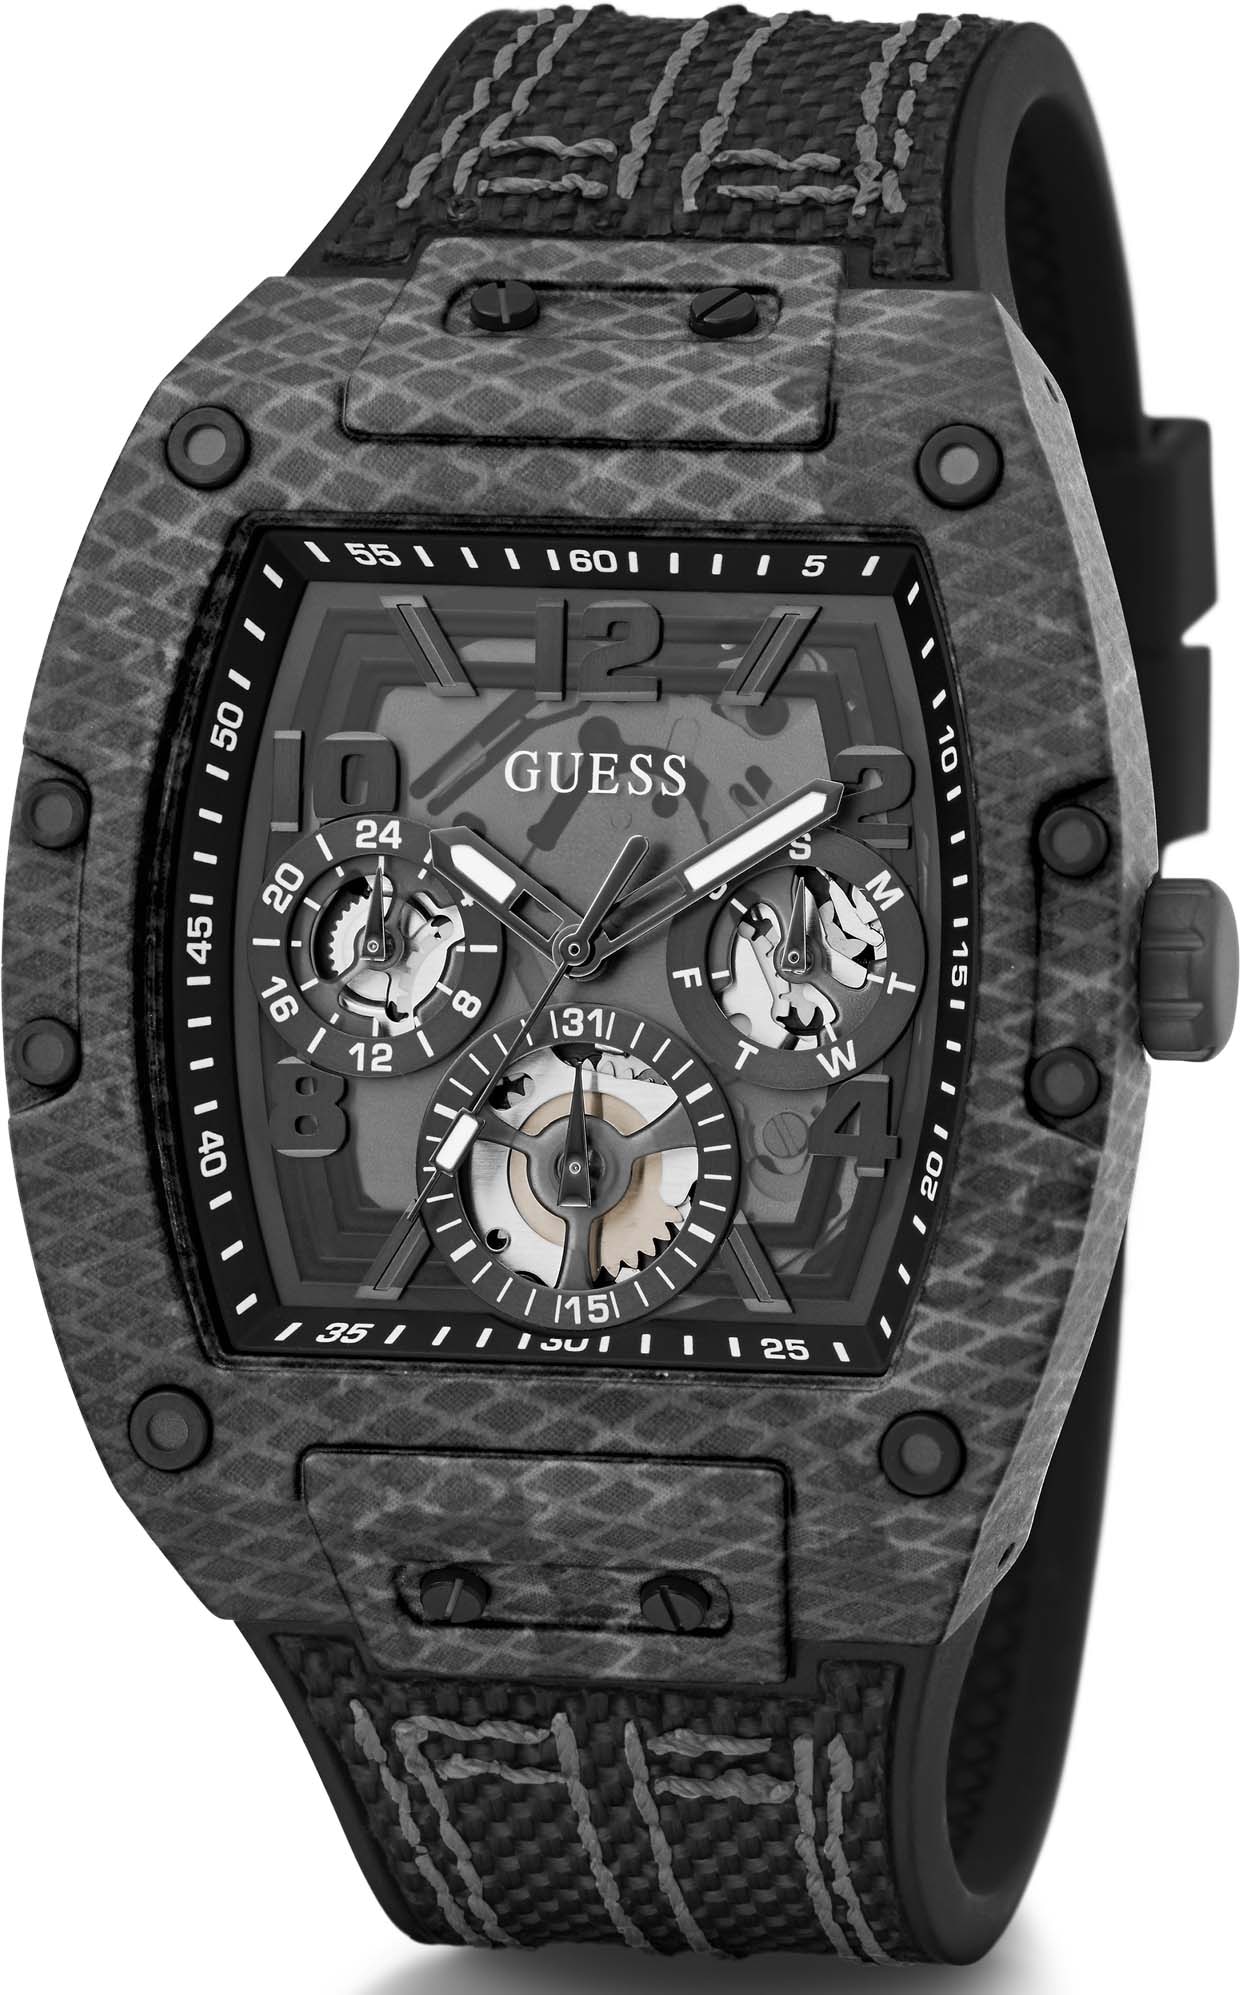 Guess »GW0422G2« Multifunktionsuhr bei ♕